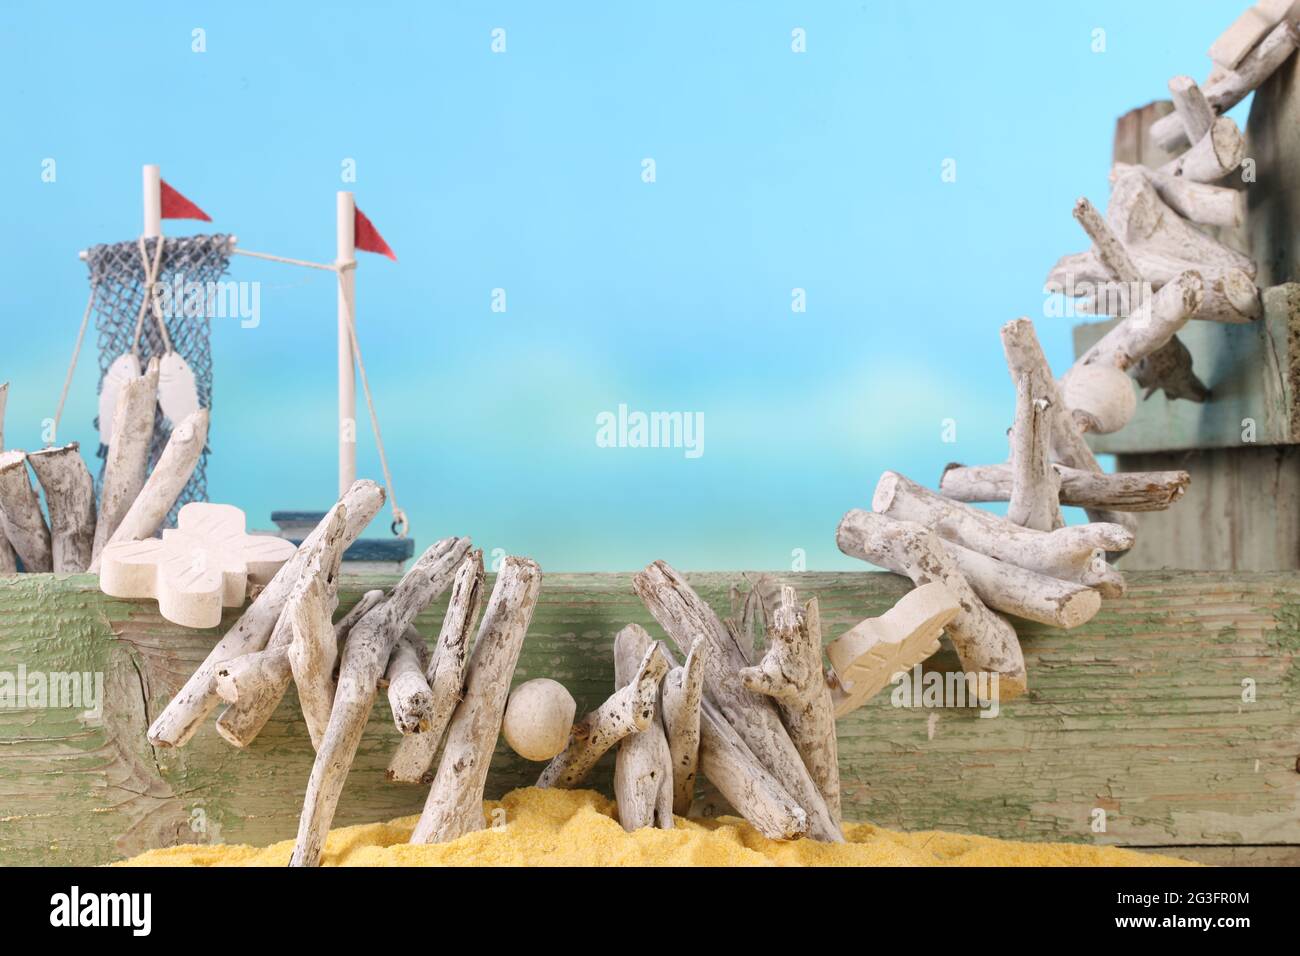 Beach with wooden planks and flotsam Stock Photo